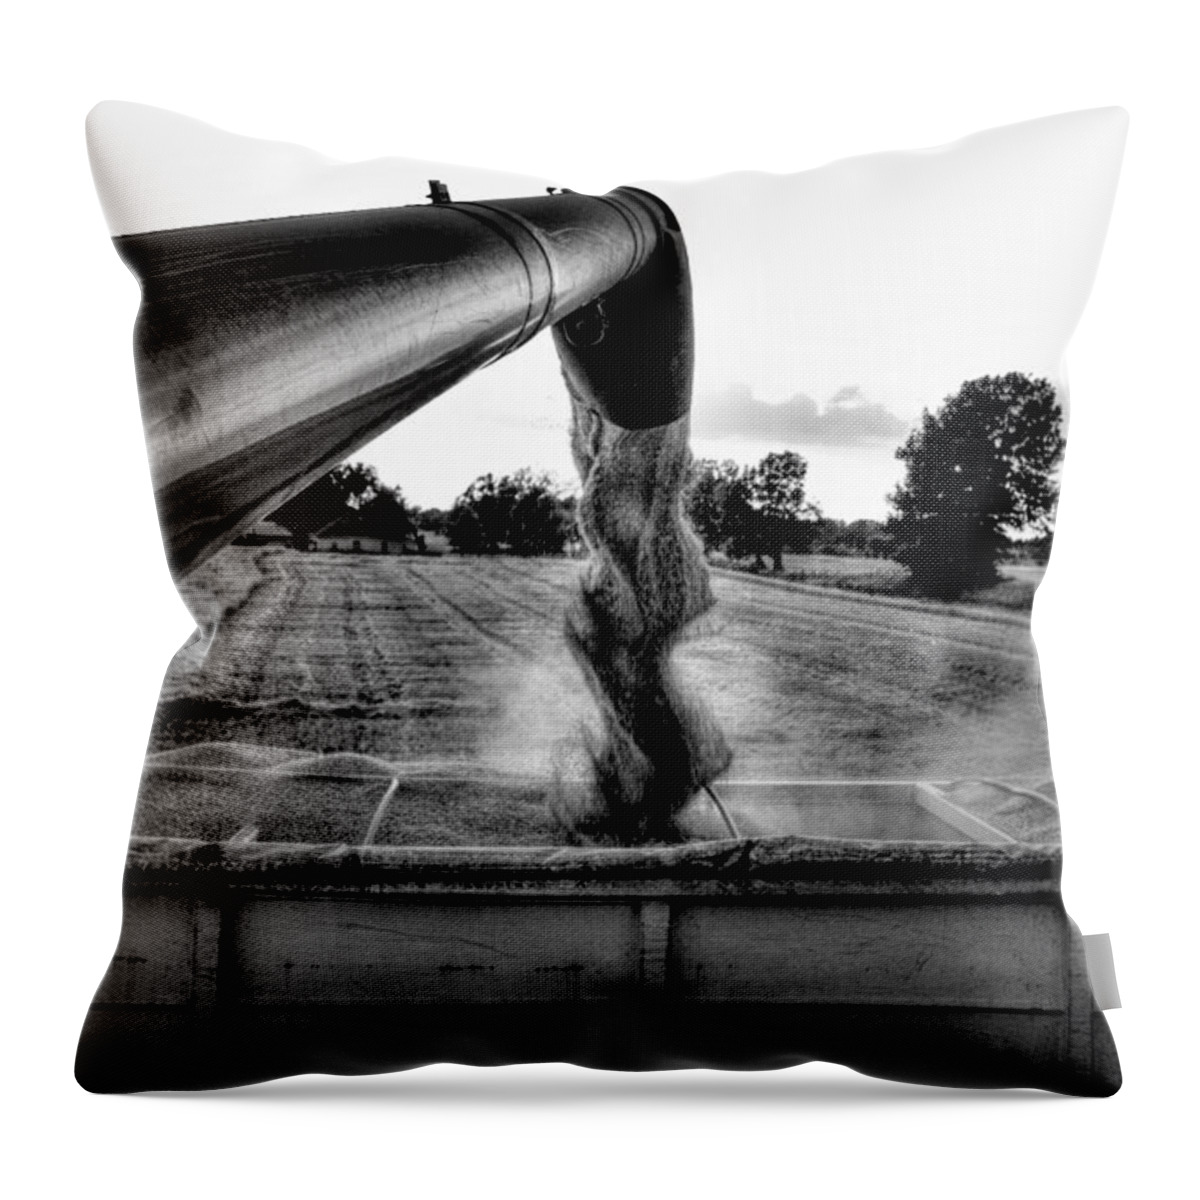 Ag Throw Pillow featuring the photograph Unloading by David Zarecor